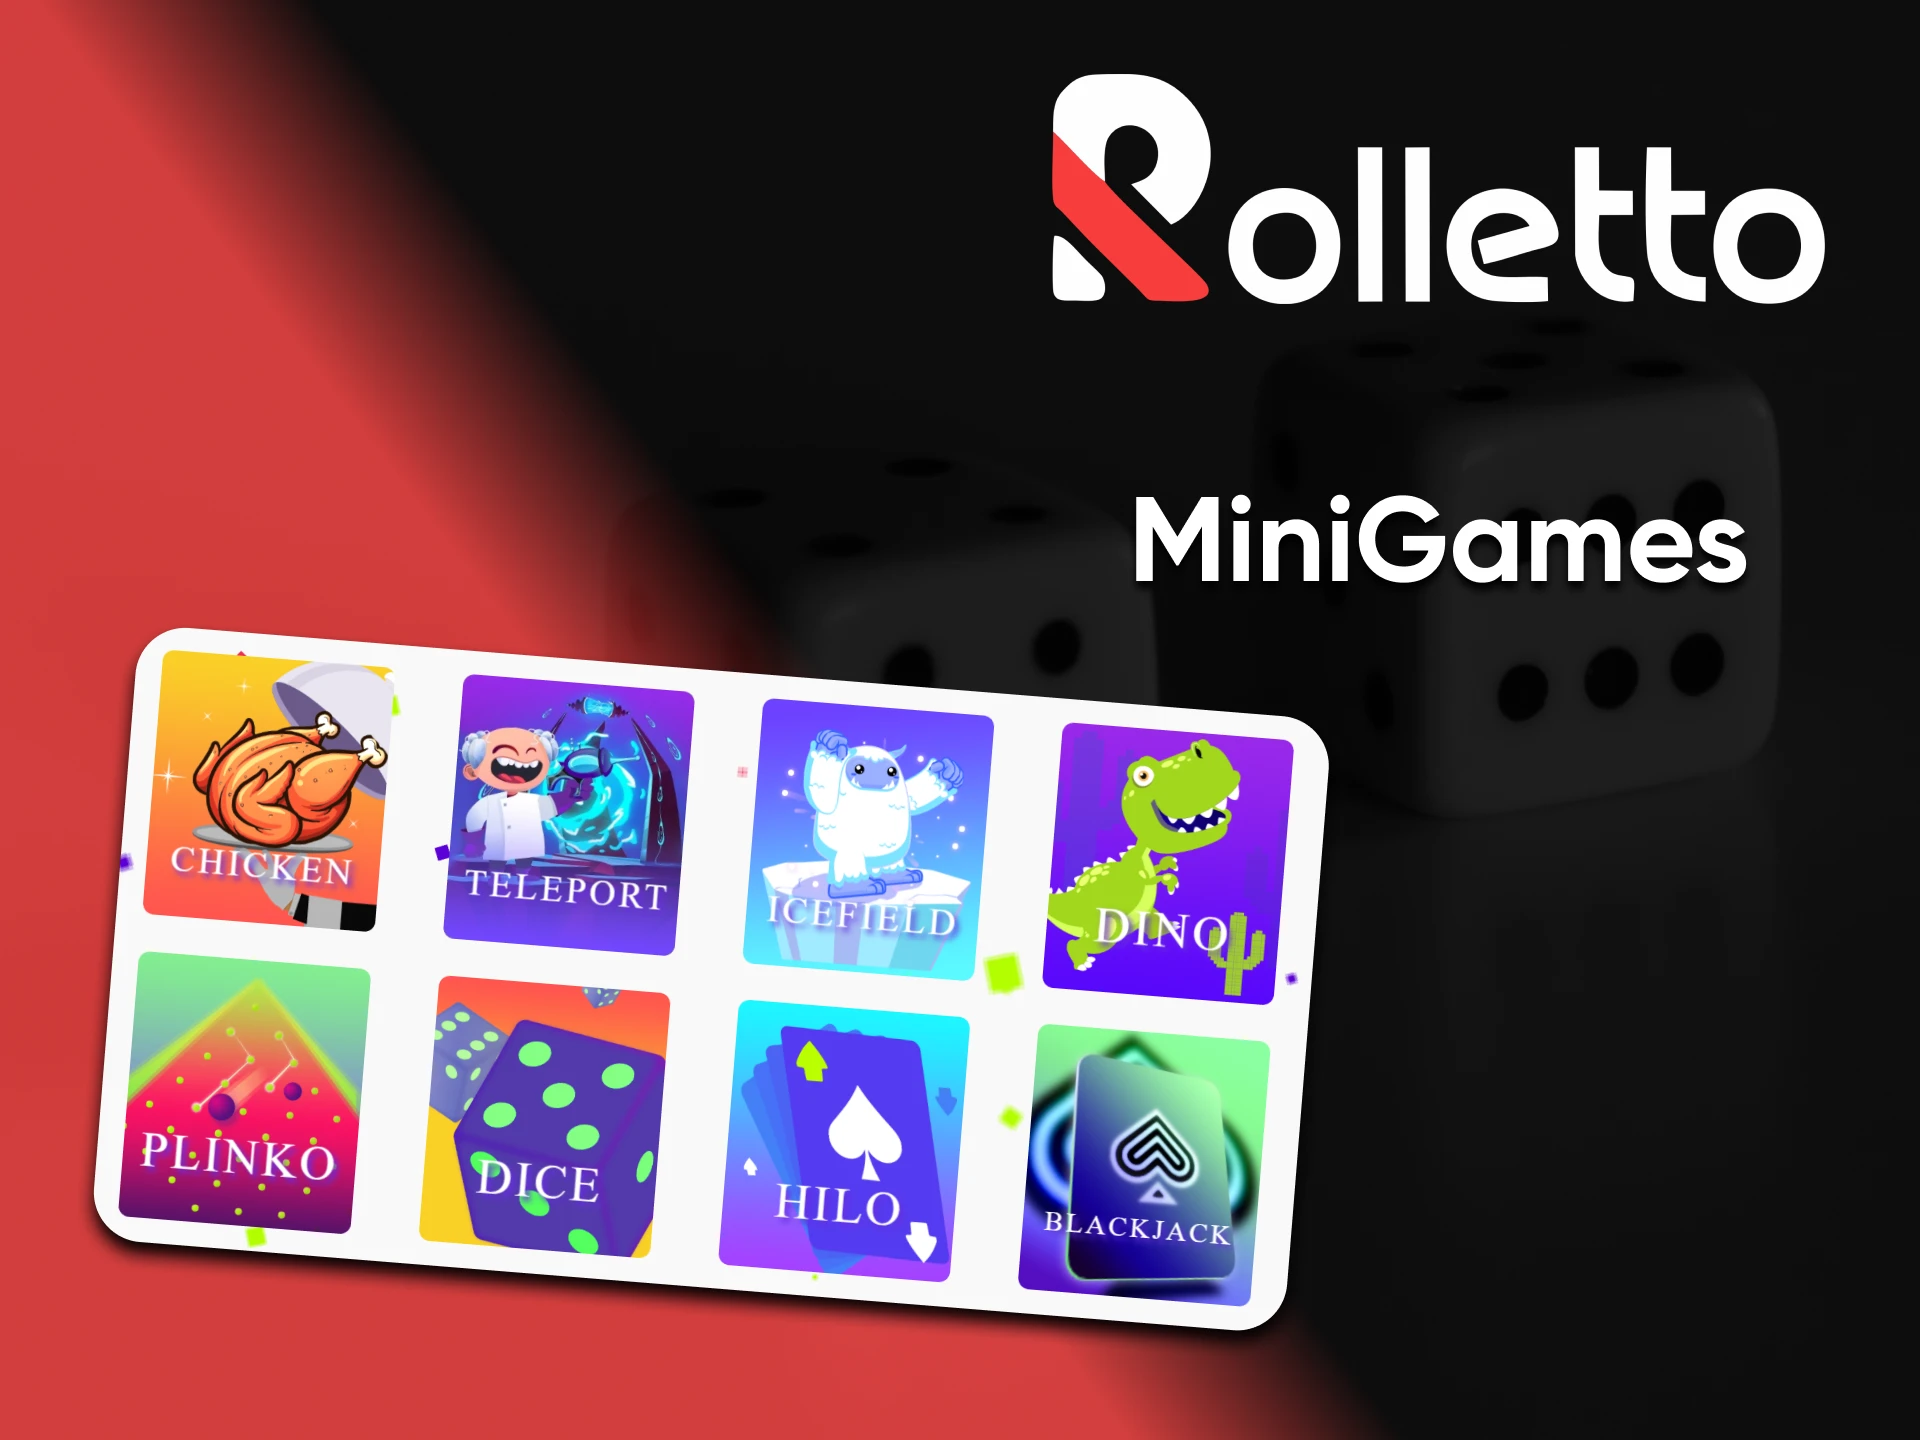 To play MiniGames, go to the special section of the Rolletto website.